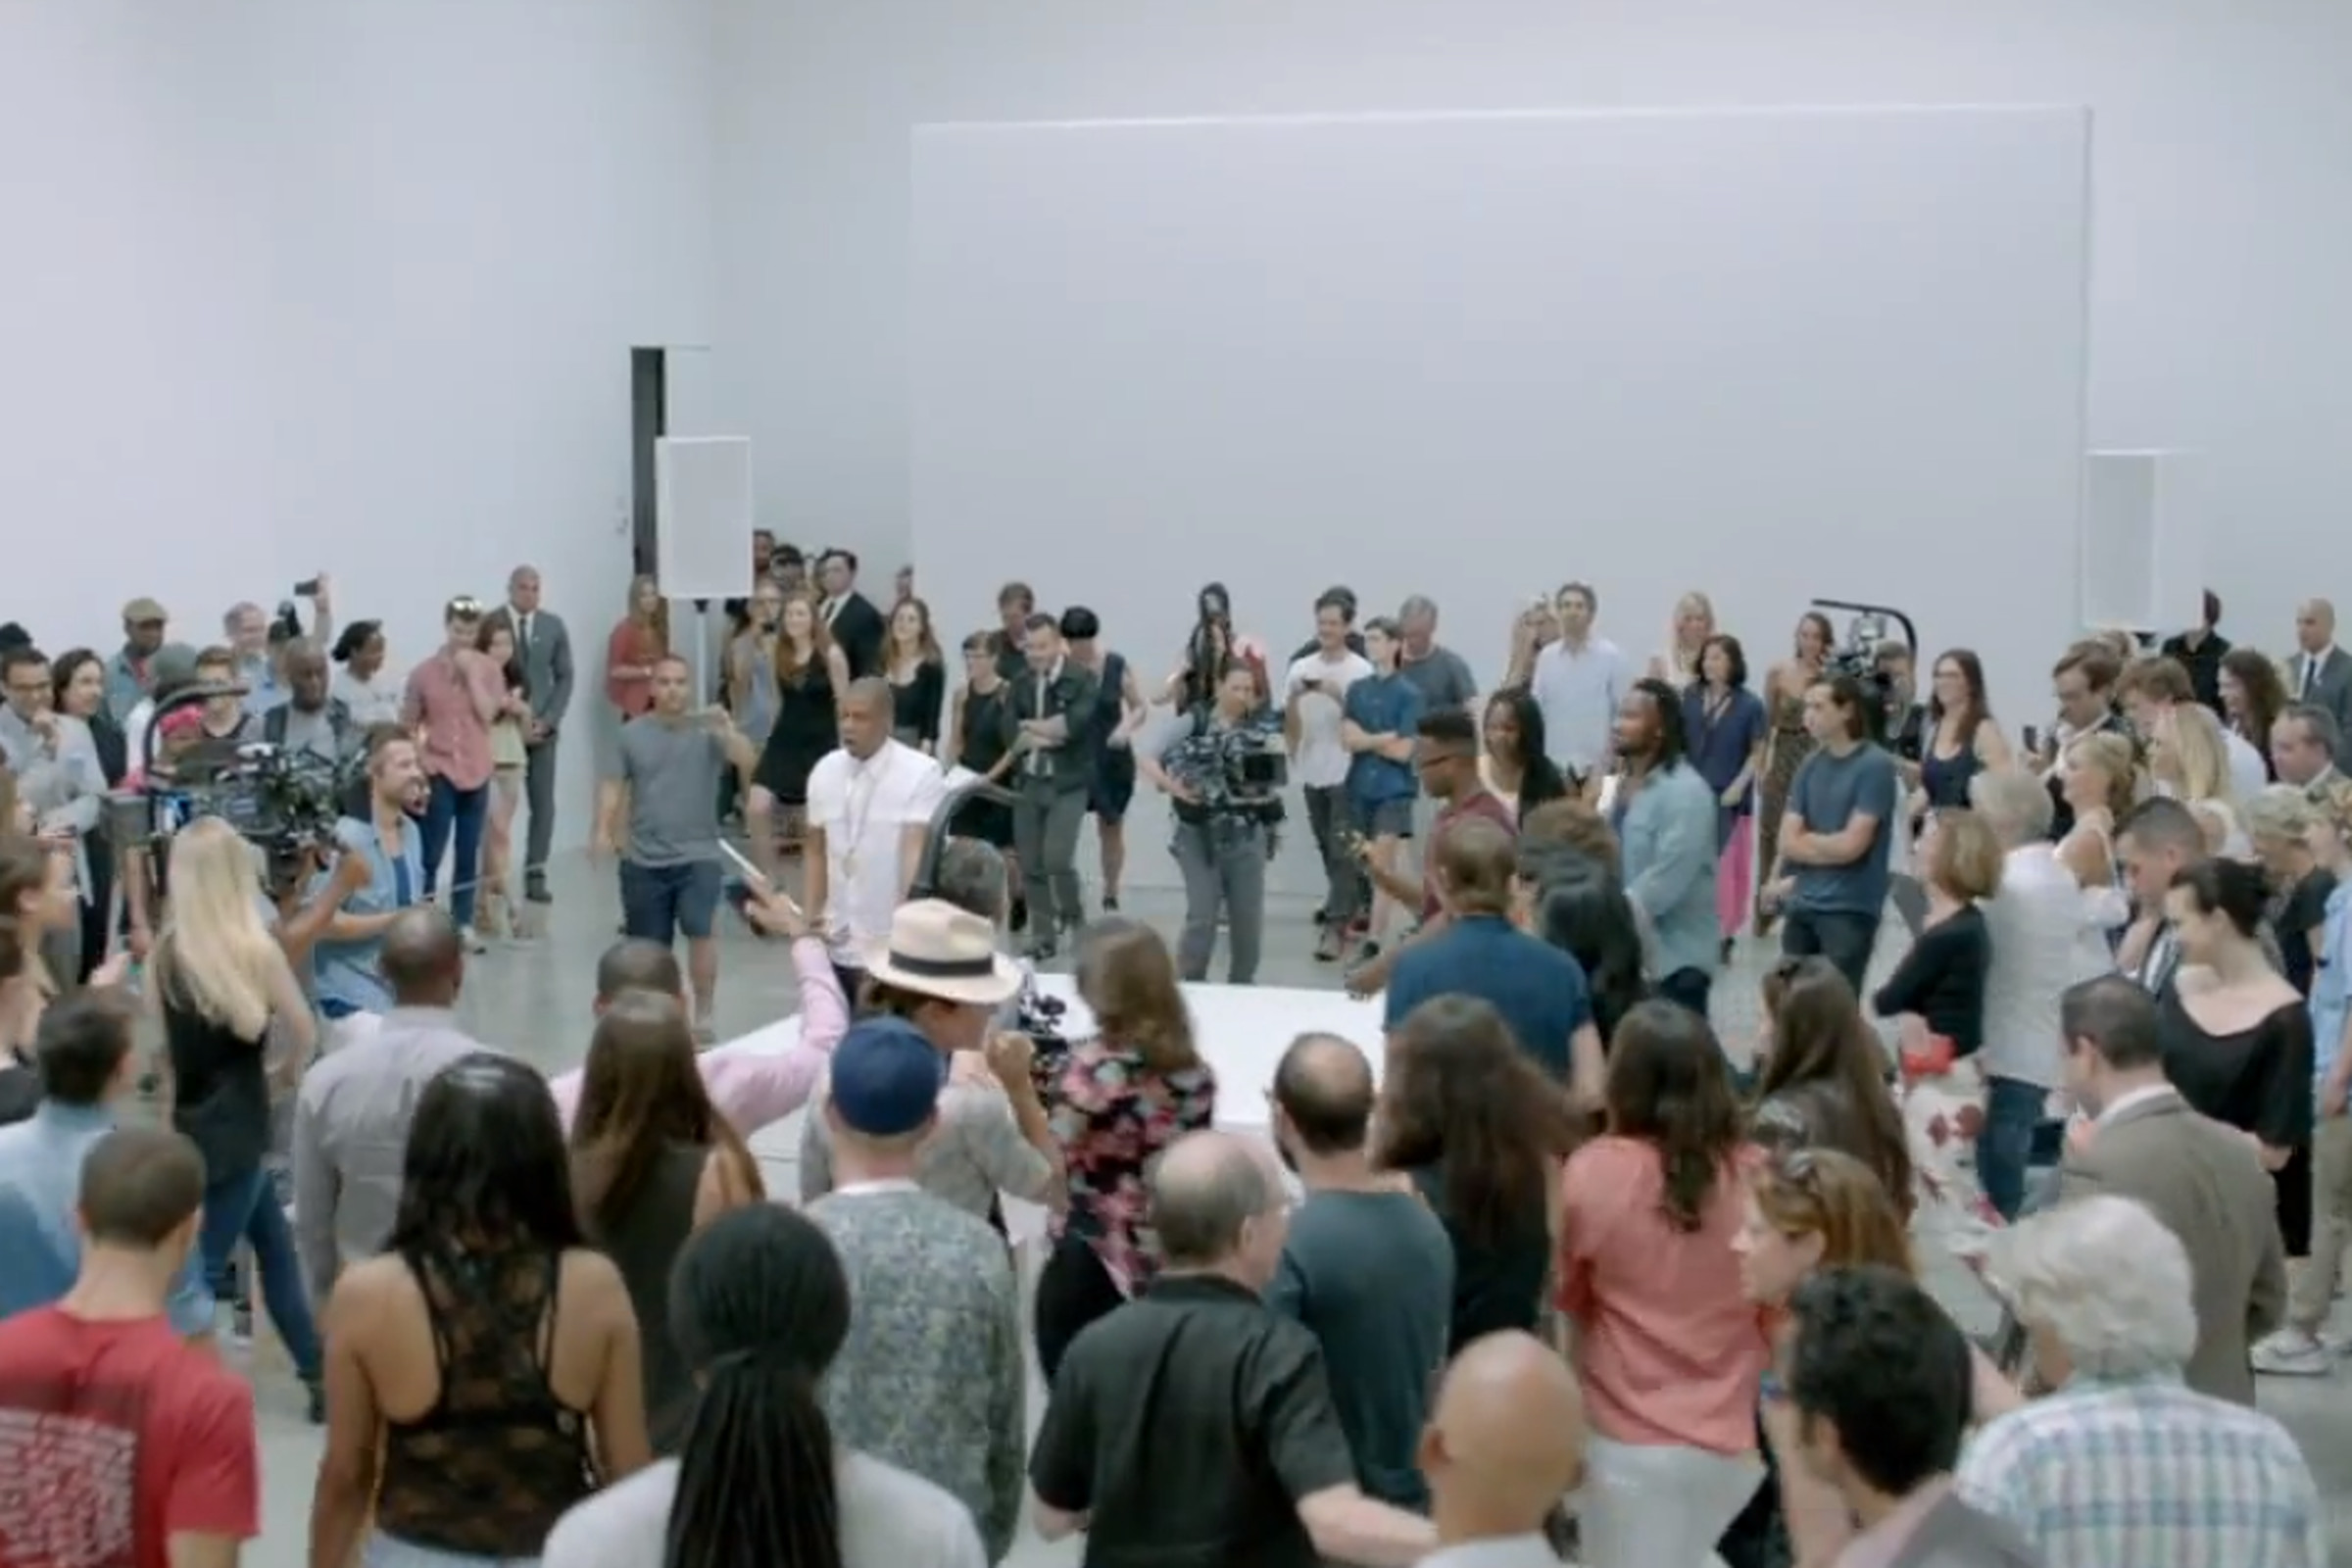 Jay Z performing Picasso Baby at Pace Gallery